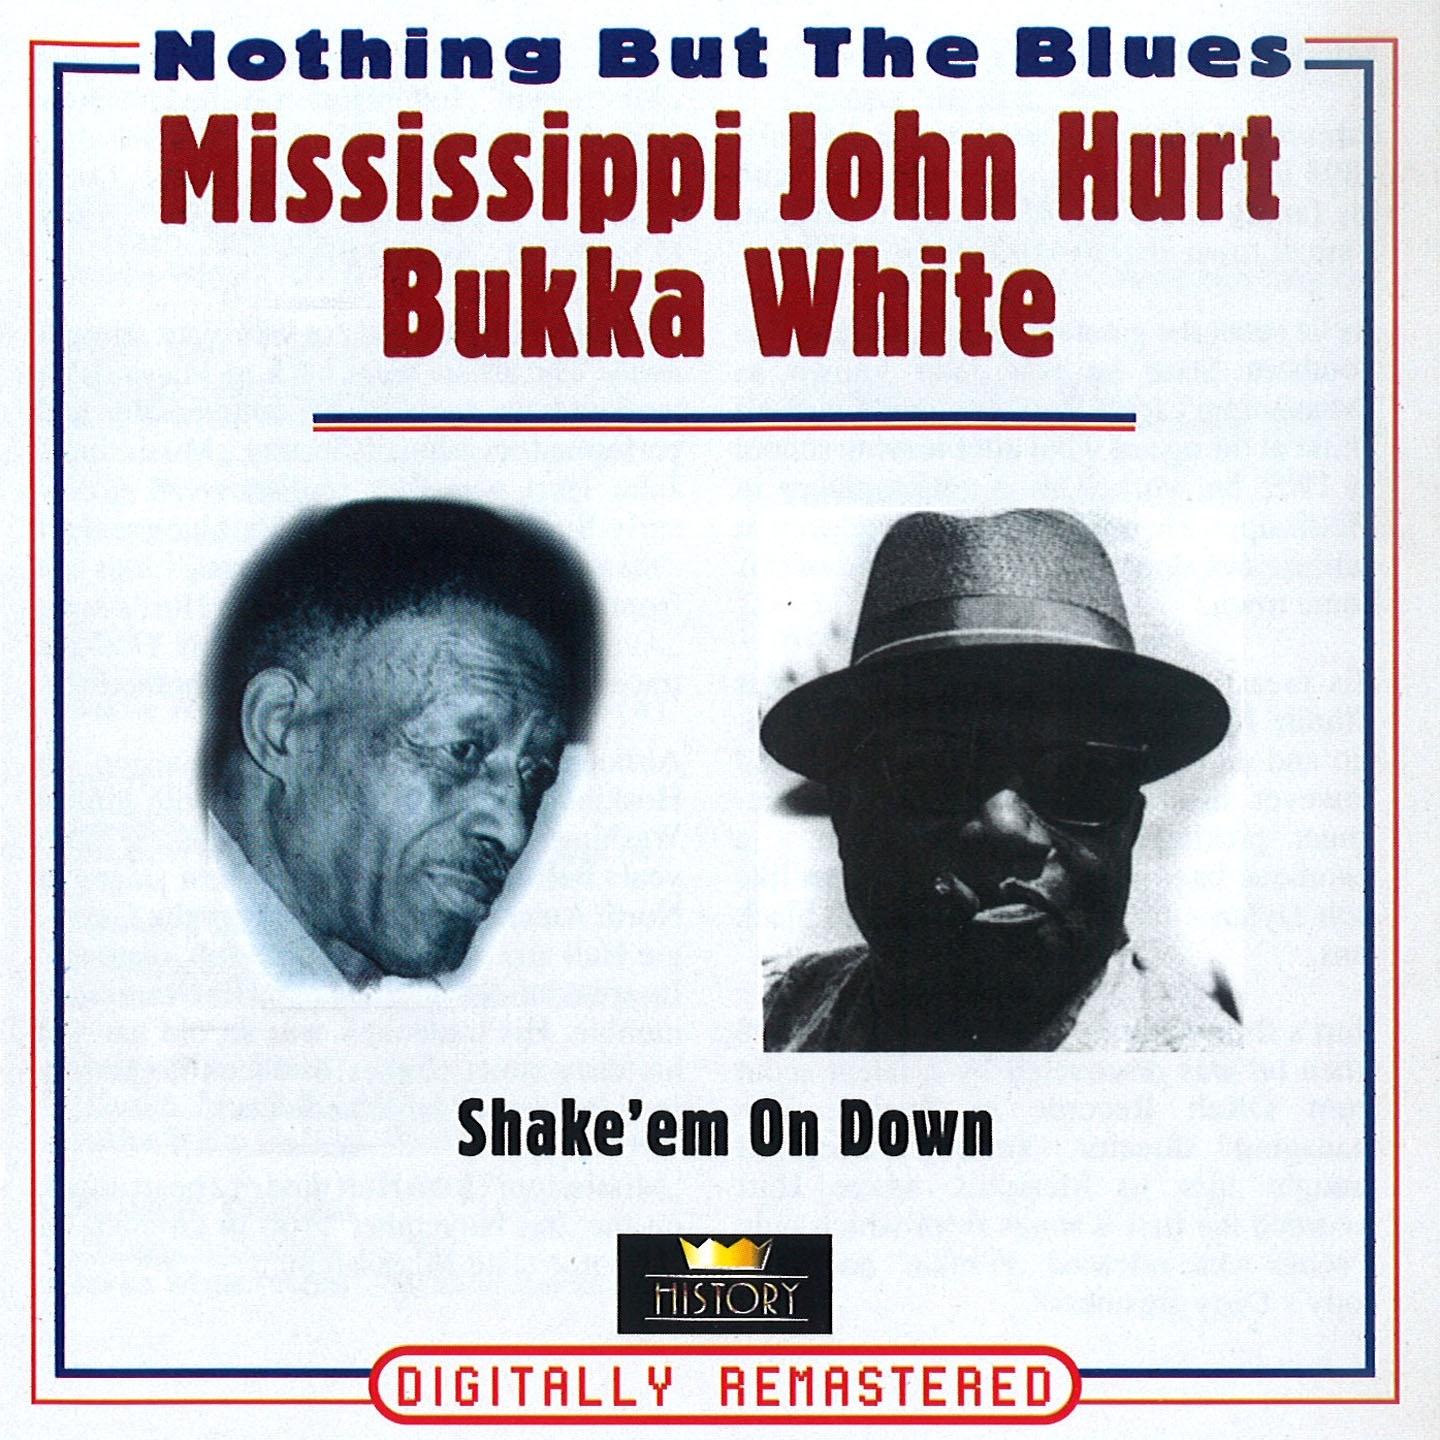 Shake 'Em On Down (Nothing But the Blues)